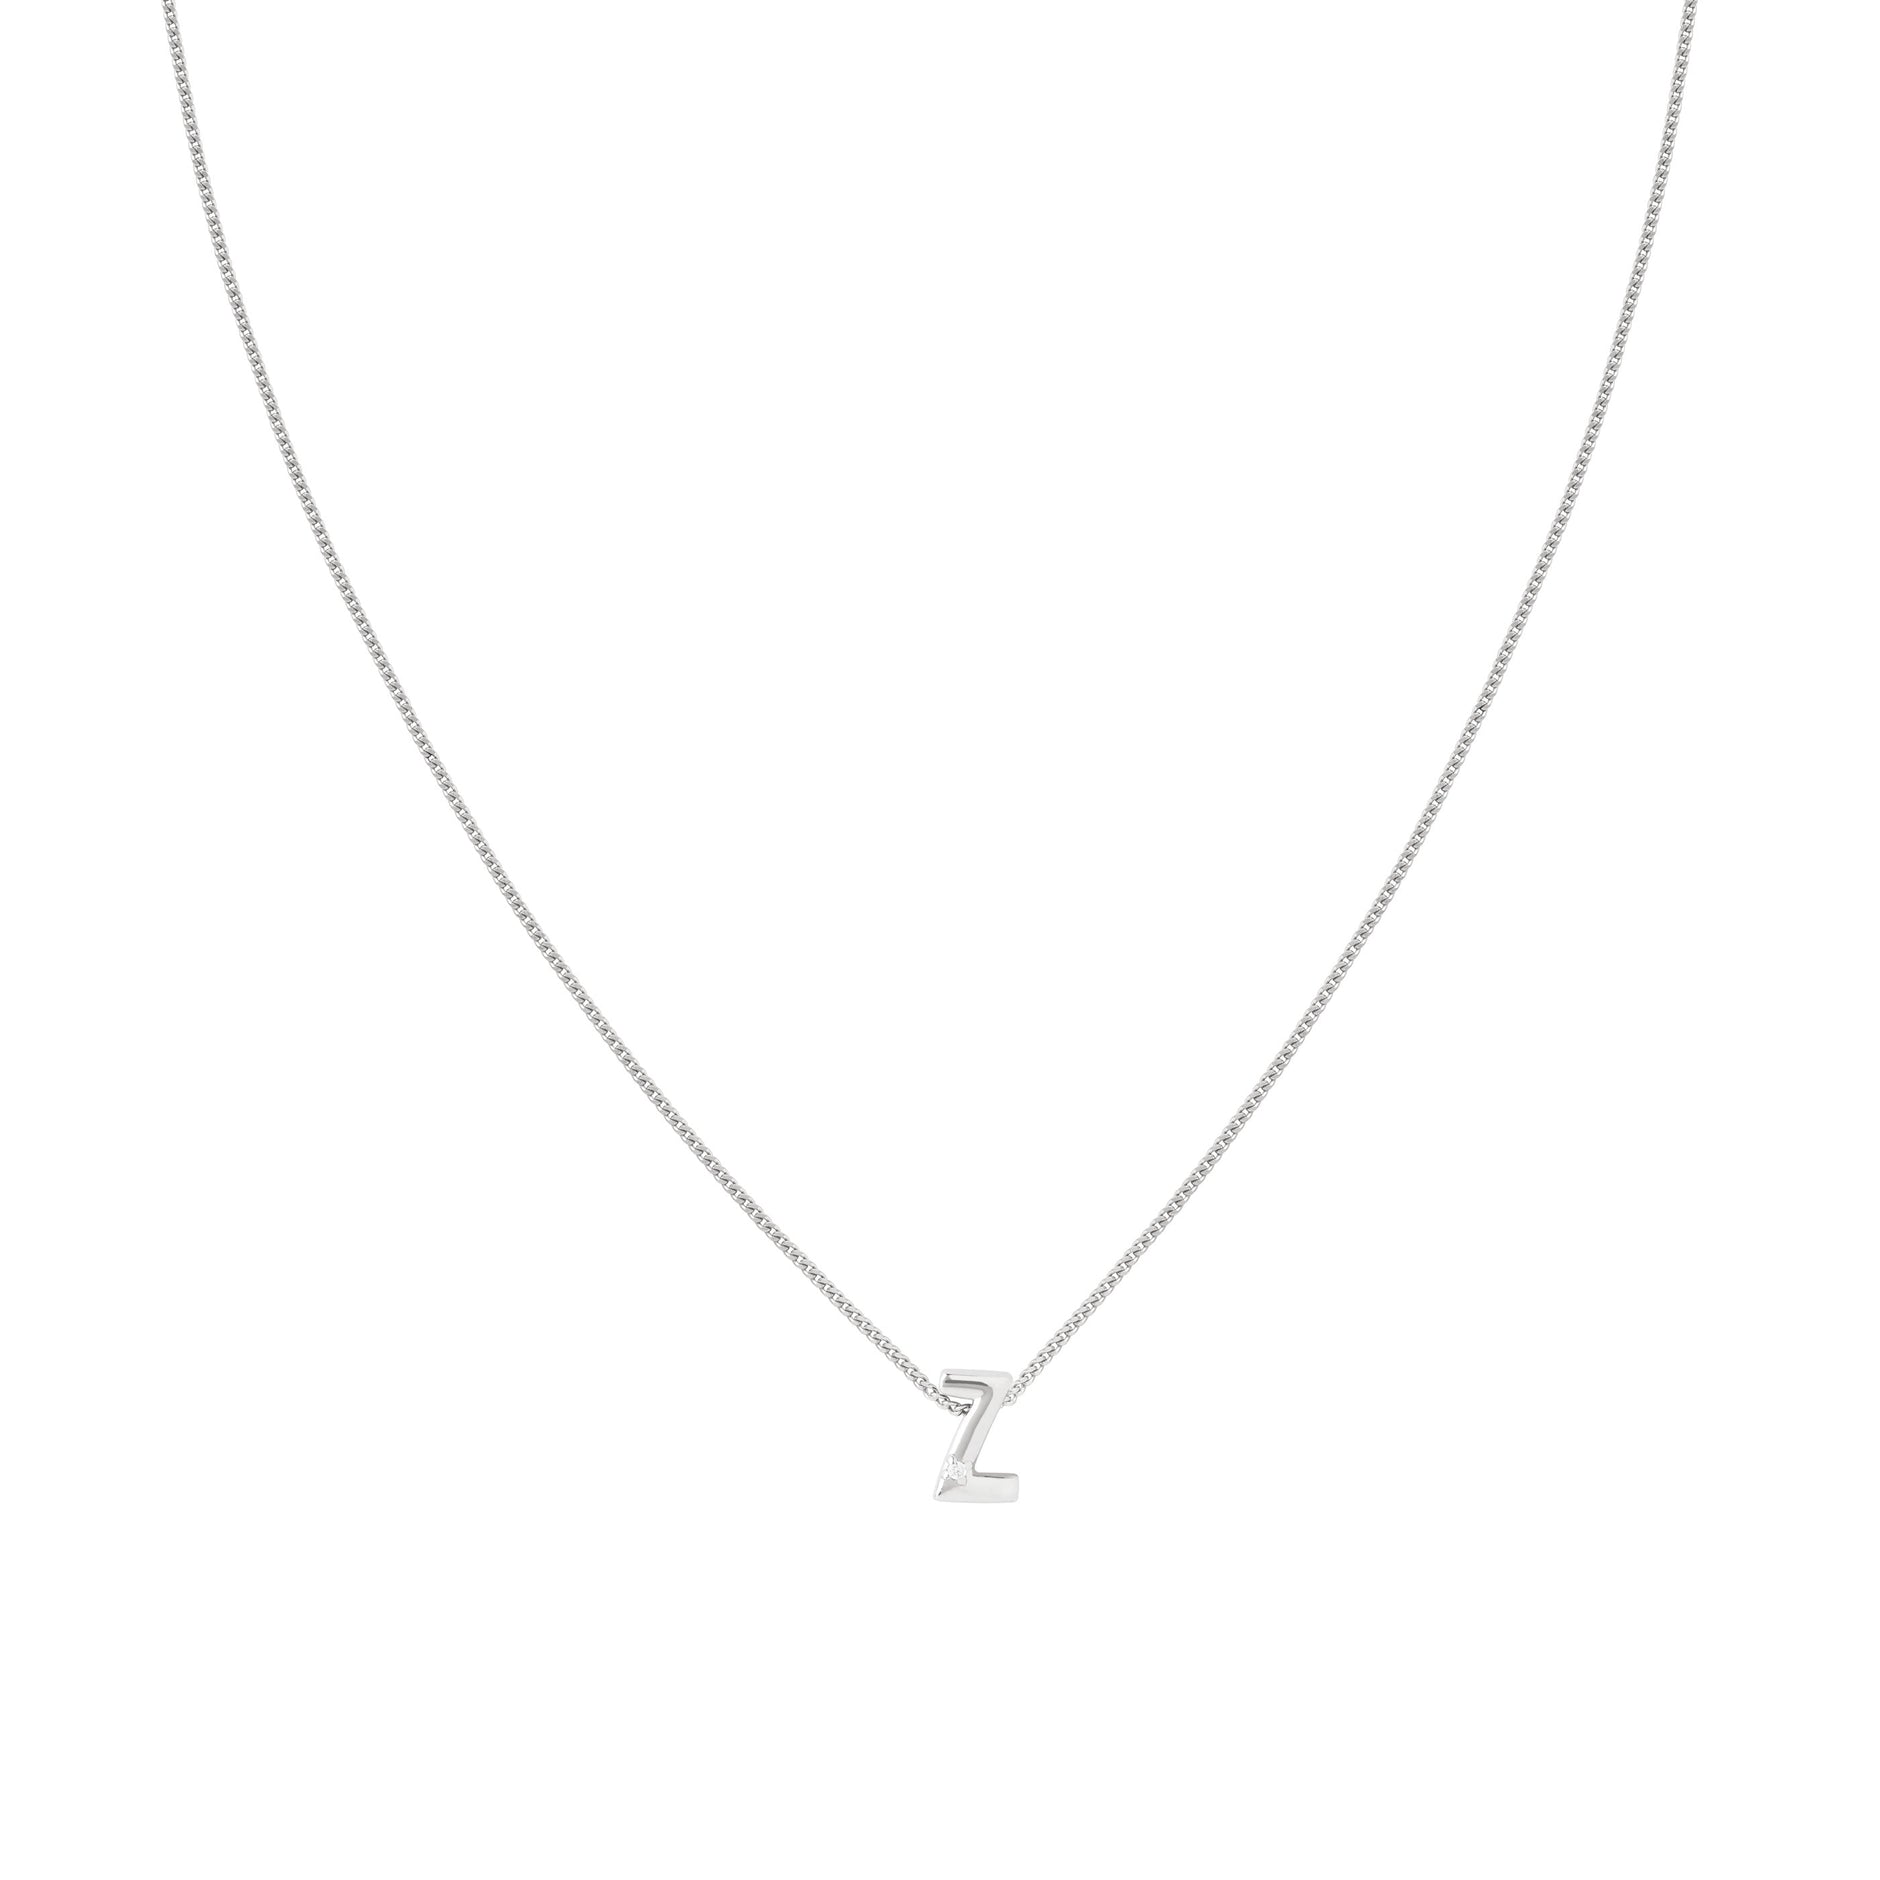 Z Initial Pendant Necklace in Silver